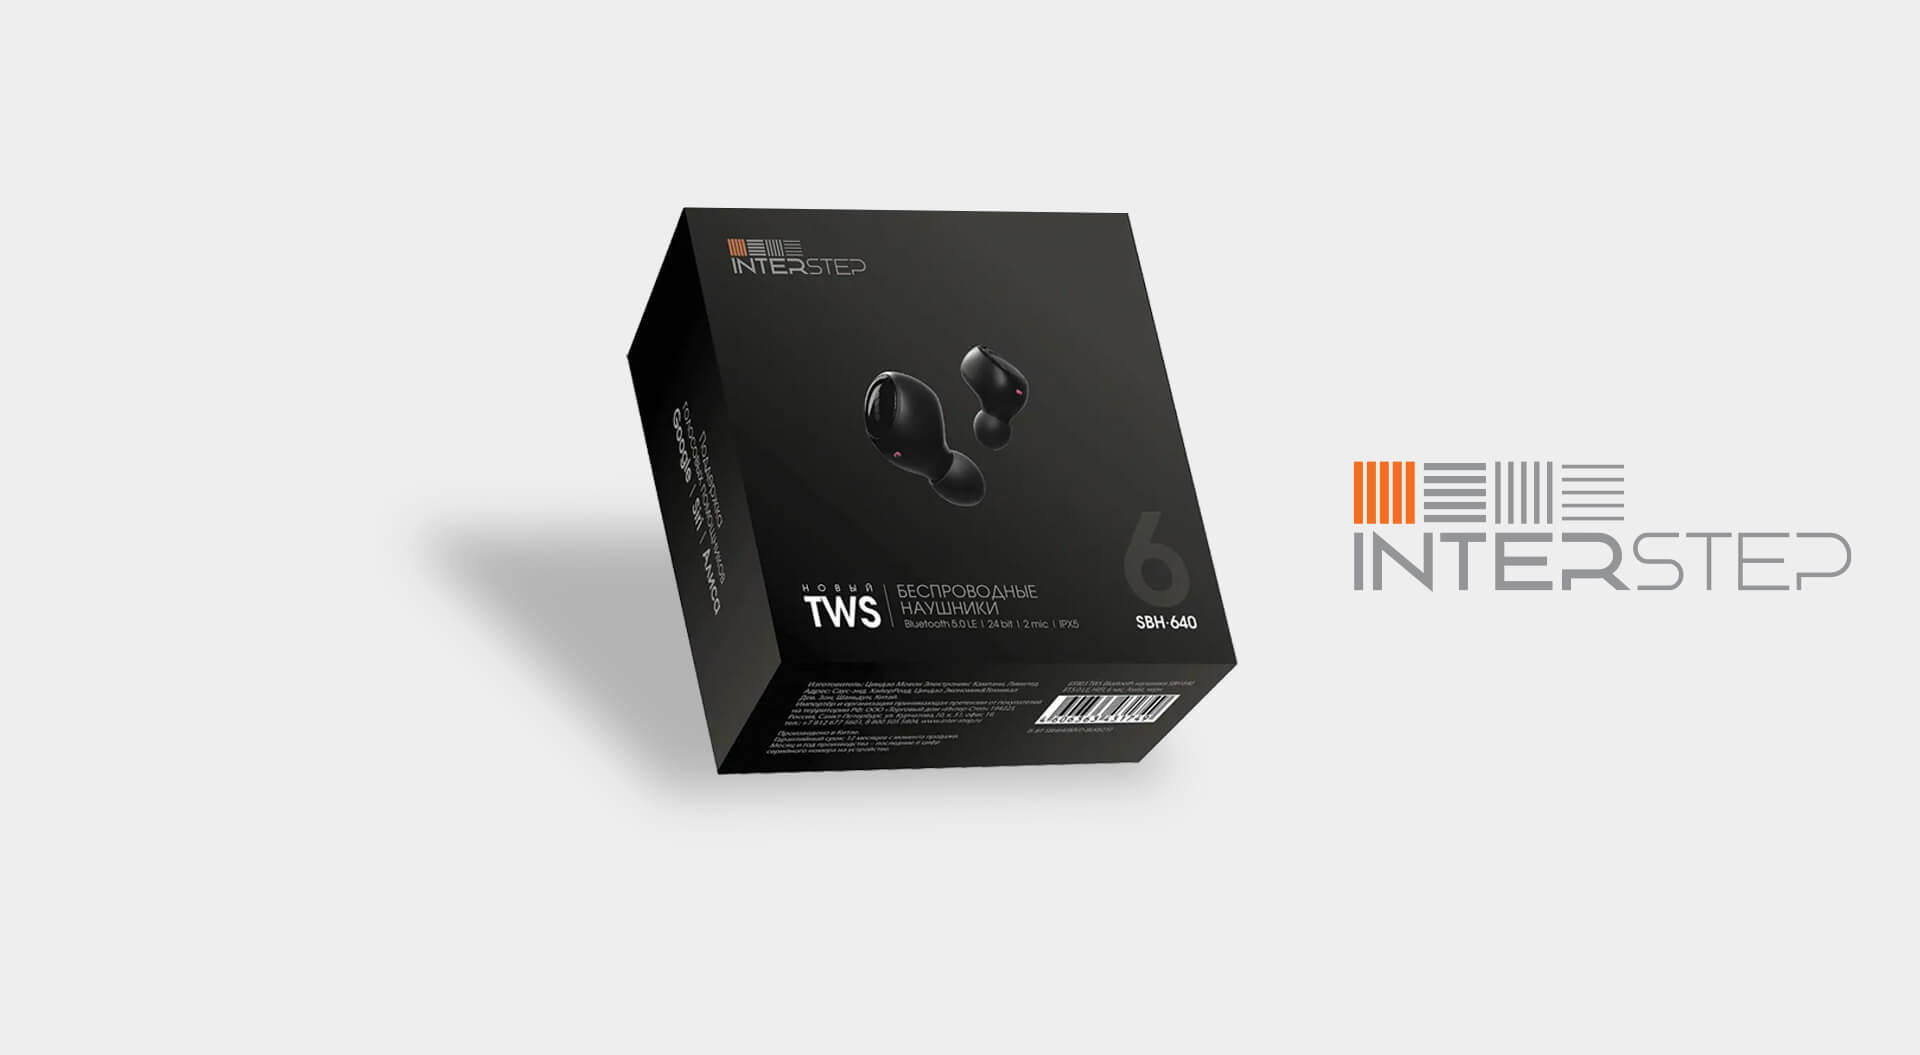 Interstep Technology rebrand identity packaging design of cordless portable ear phones 